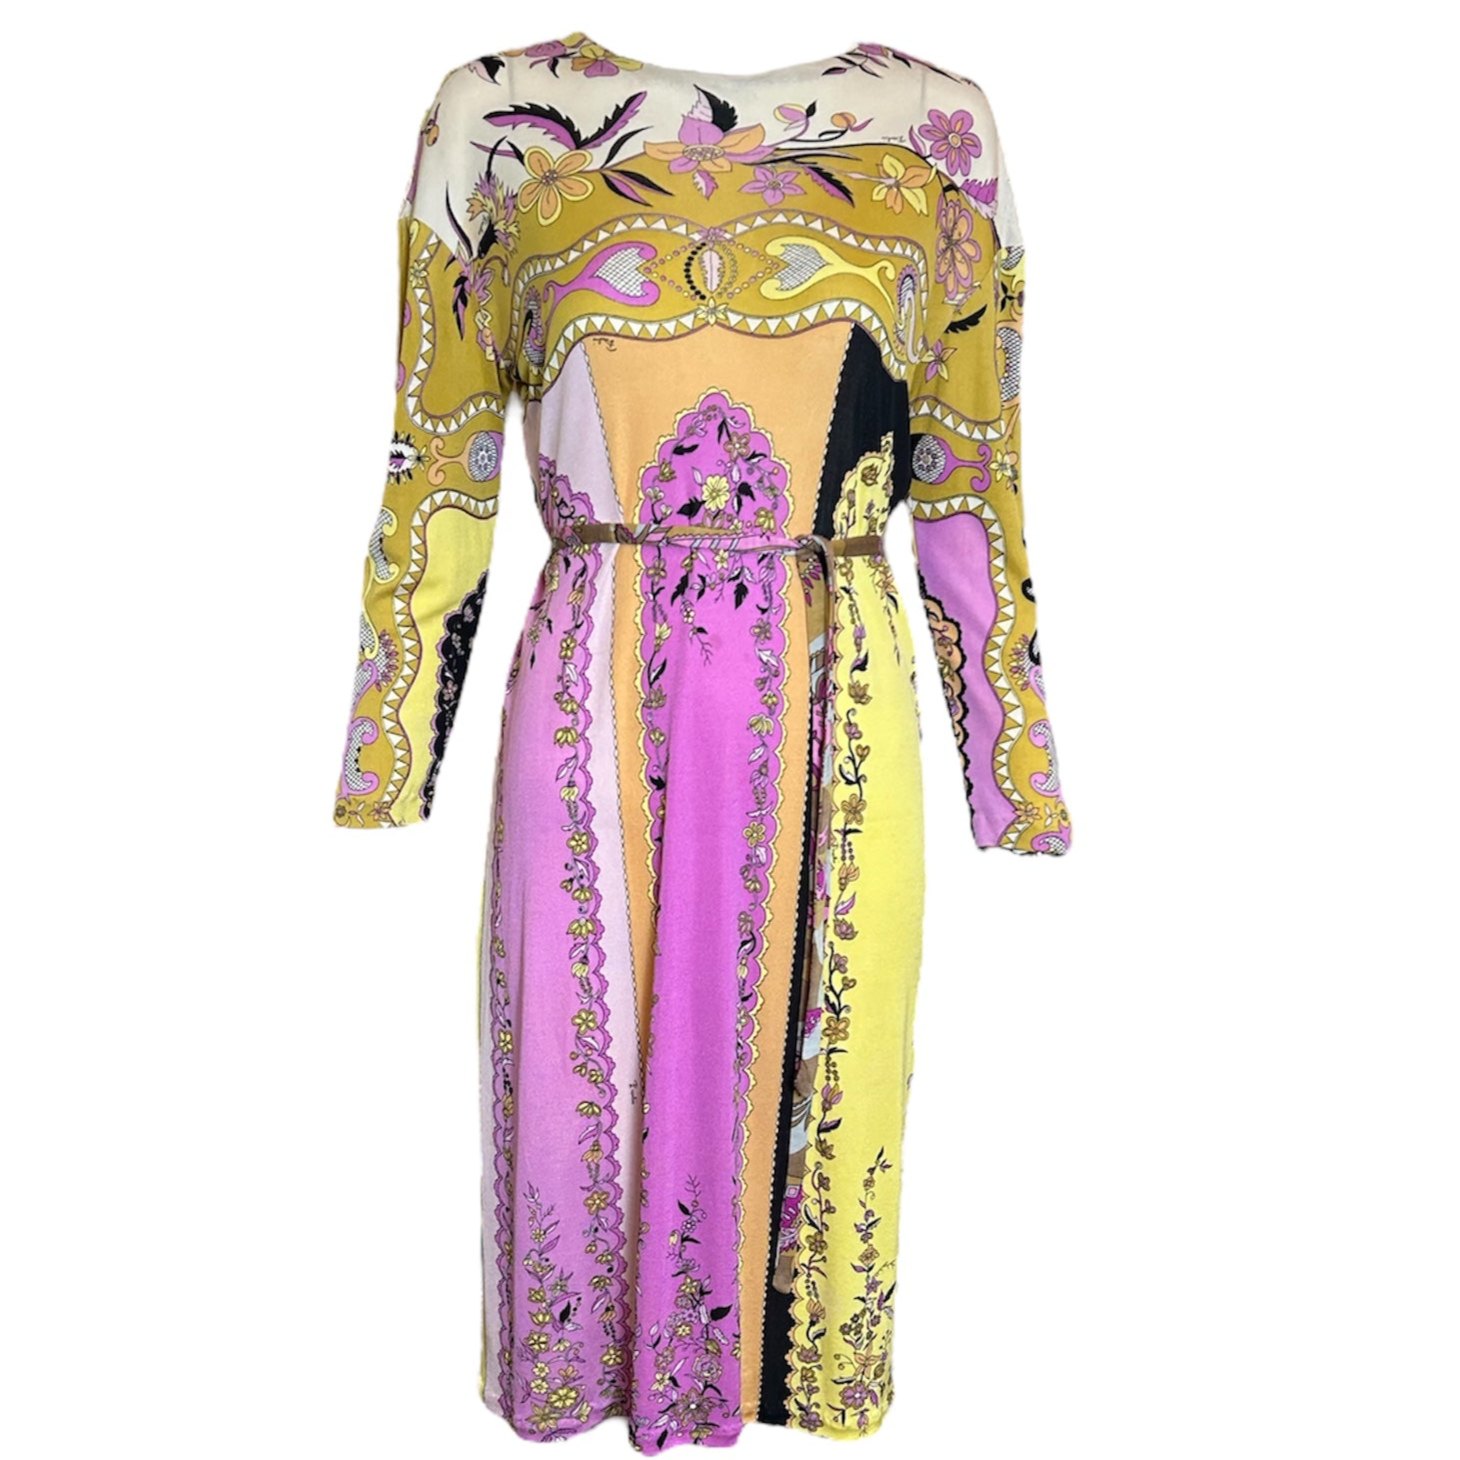  Pucci 1960s Floral Pastels Silk Jersey Dress w/ Belt FRONT PHOTO 1 OF 6